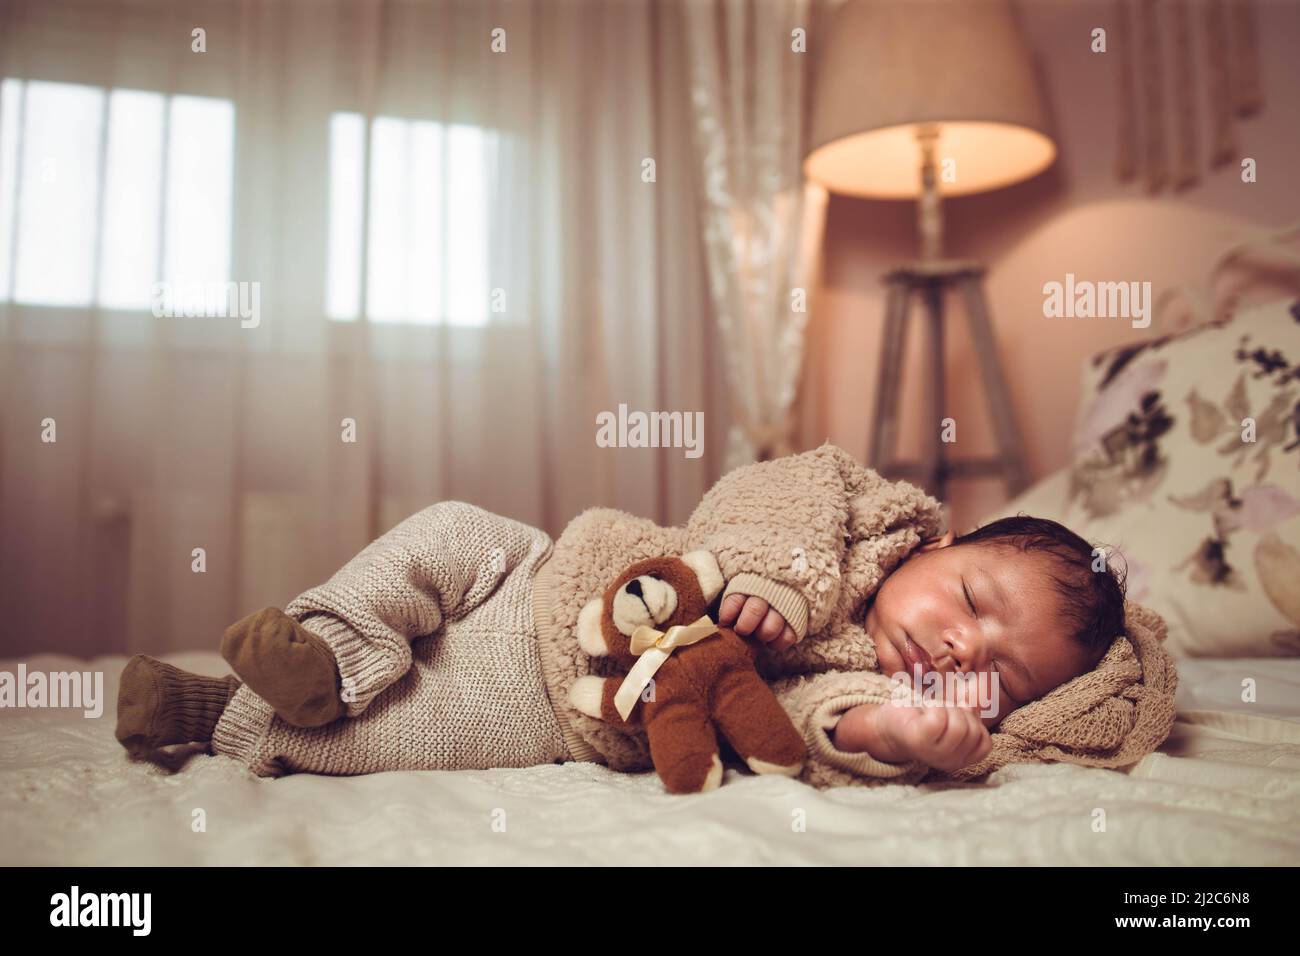 Infant multiethnic baby boy sleeping on a bed. Looking cozy with teddy bear Stock Photo